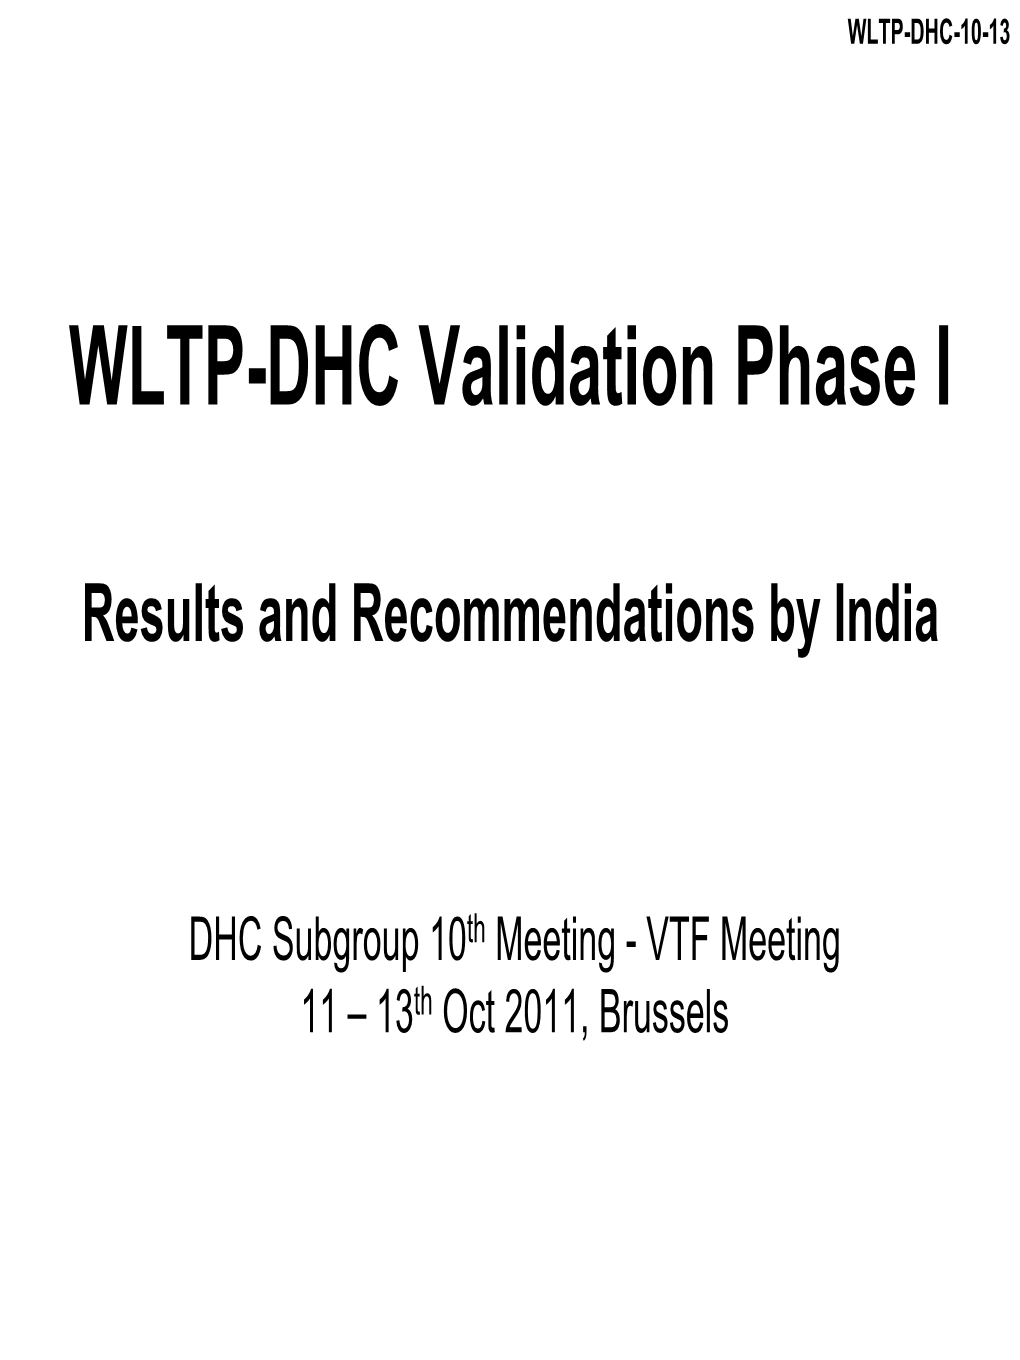 WLTP Validation Phase I Results and Recommendations by India